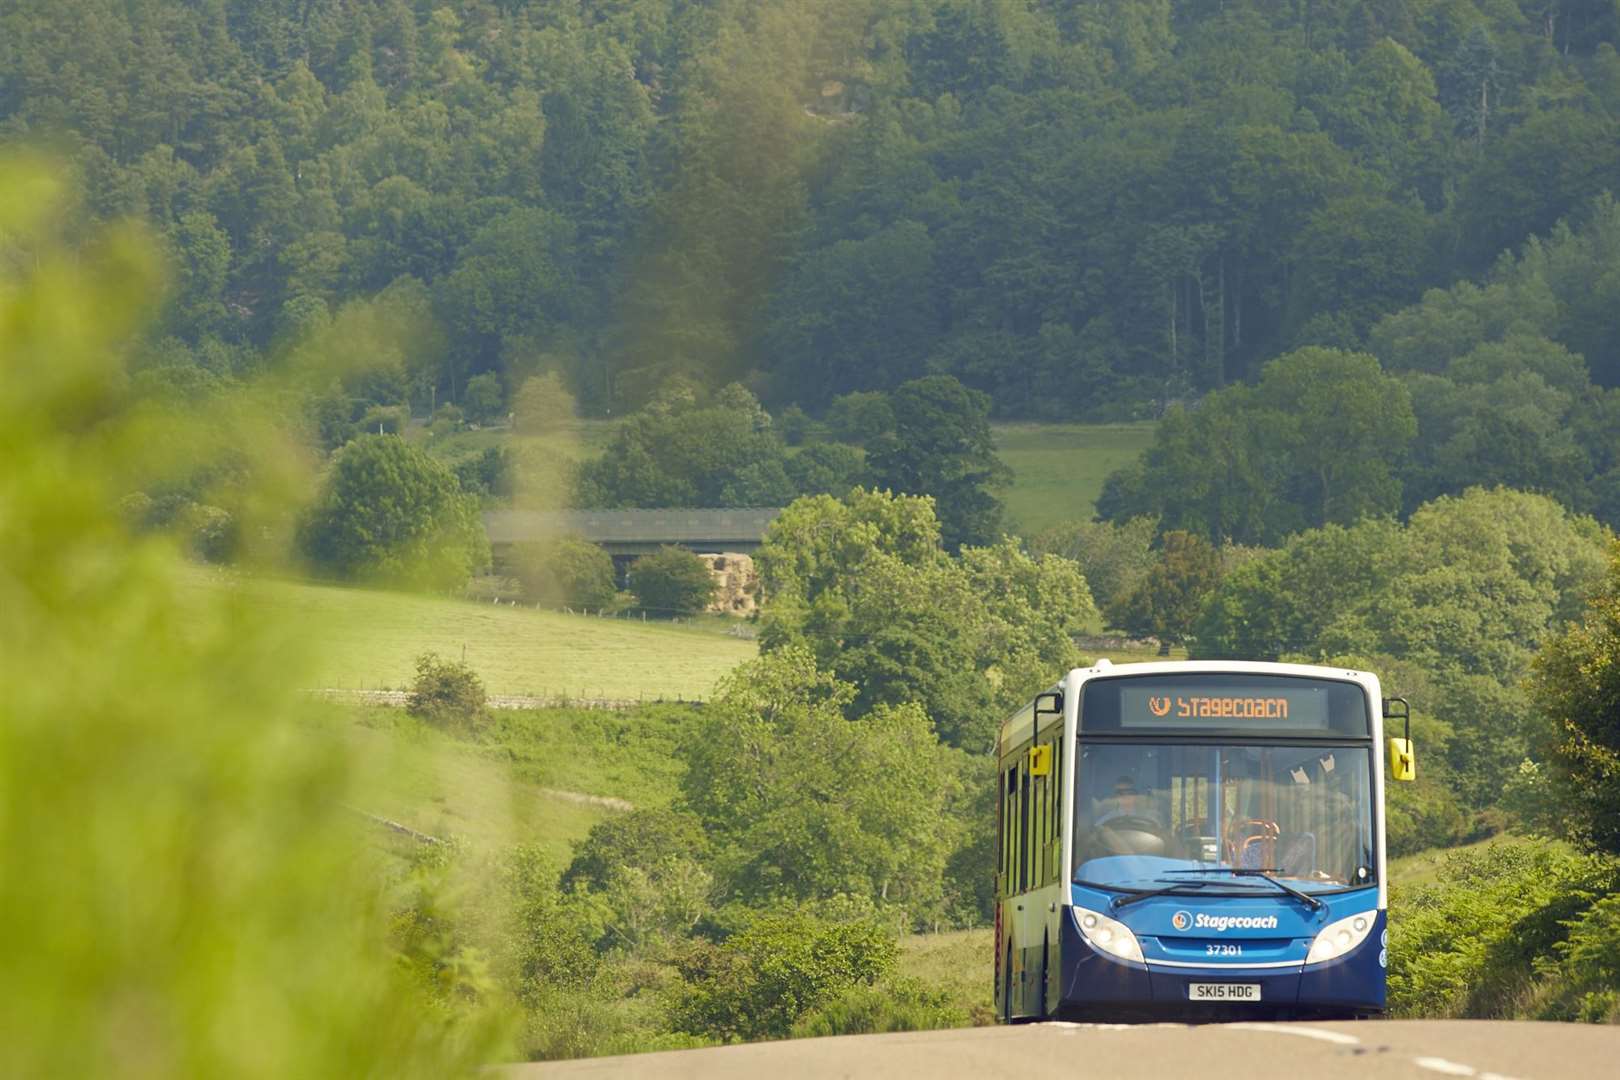 A bus on a rural route.